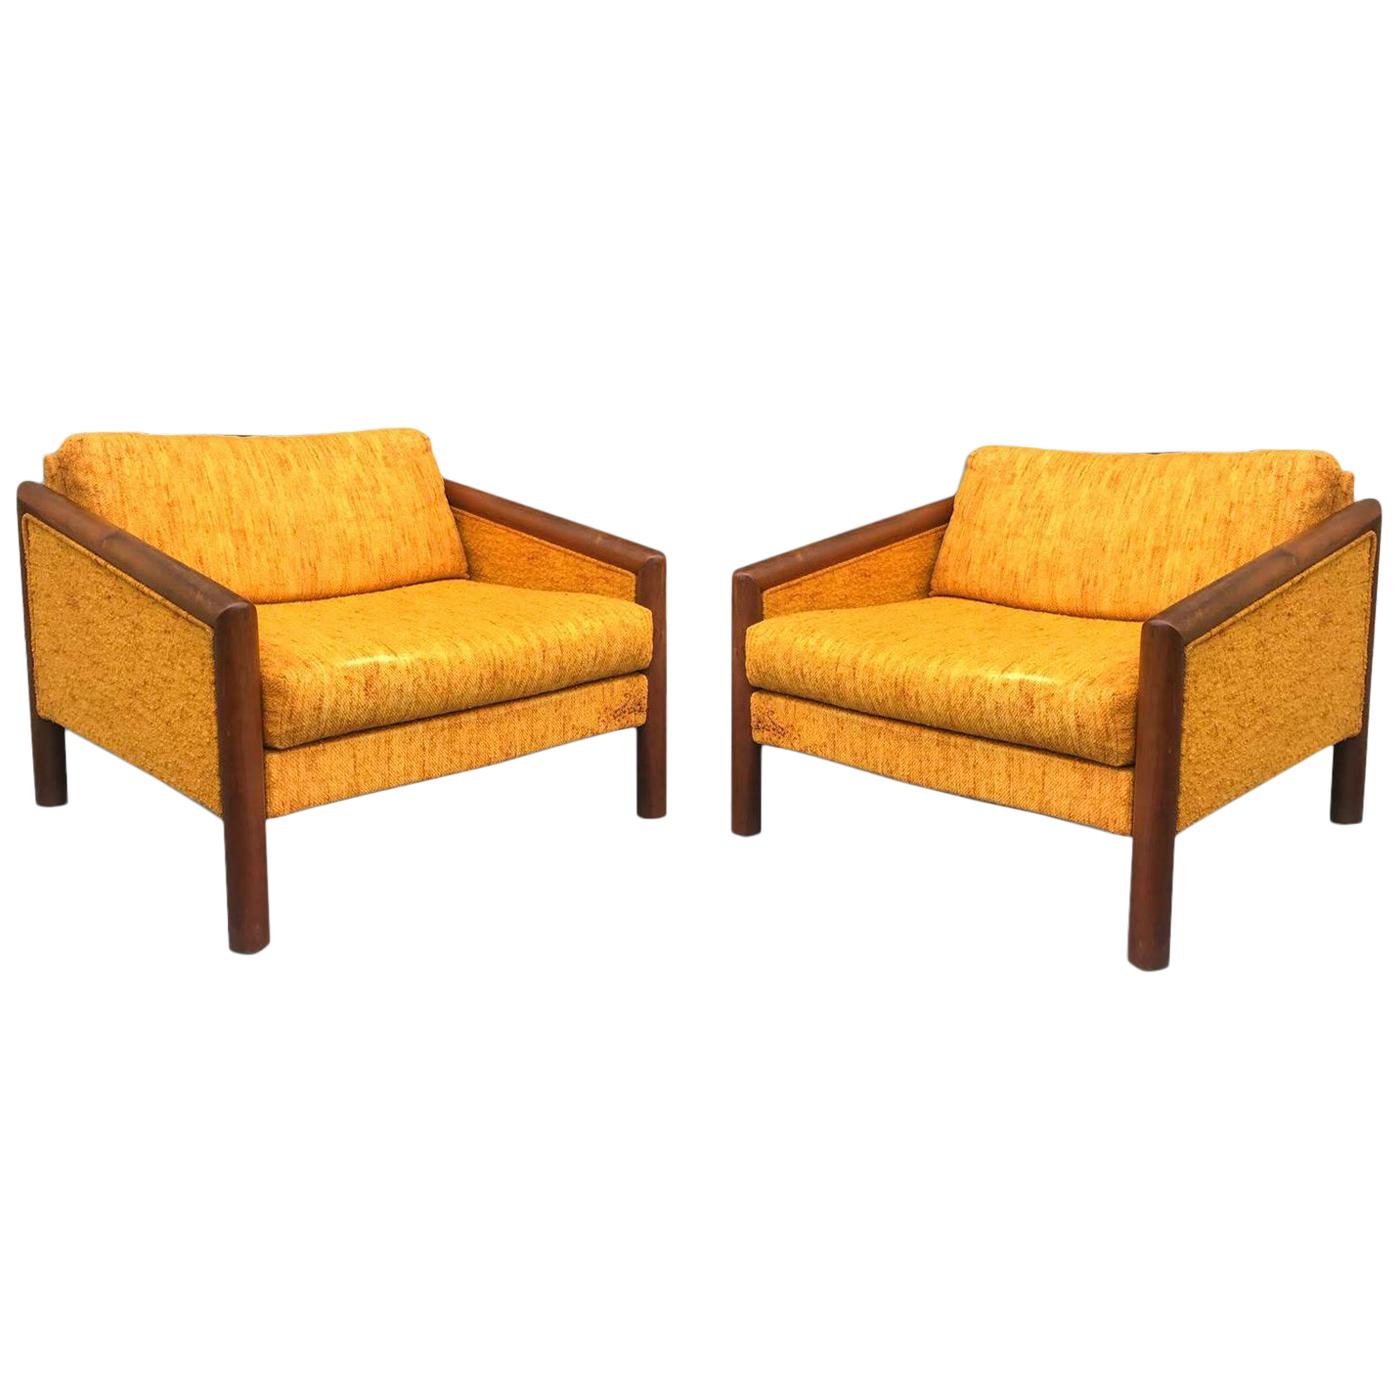 Pair of Adrian Pearsall Armchairs for Craft Associates, 1960s